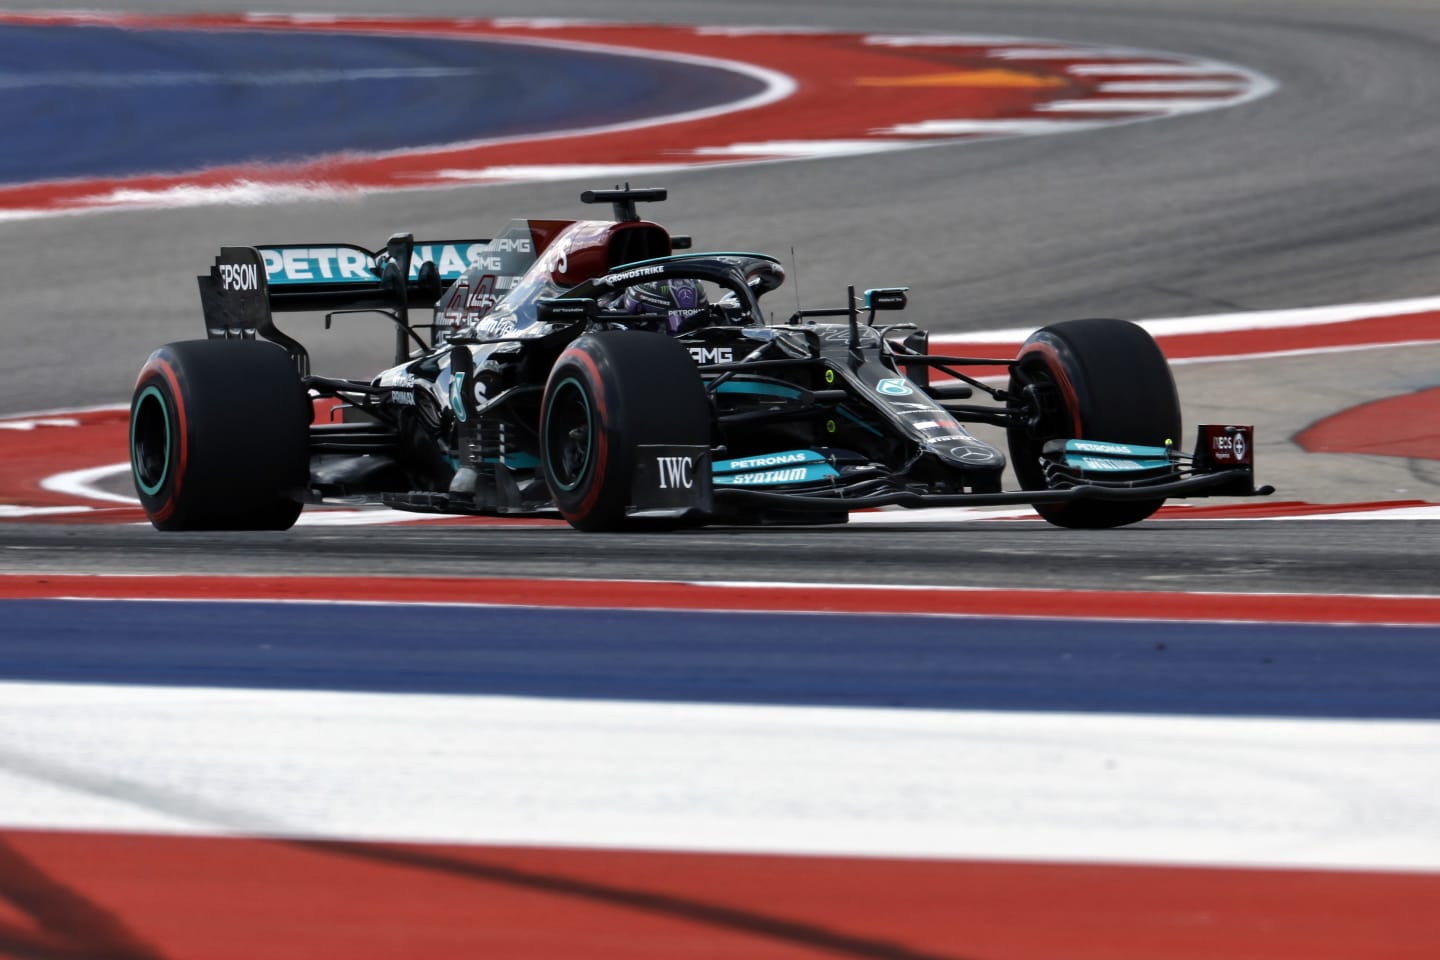 AUSTIN, TEXAS - OCTOBER 22: Lewis Hamilton of Great Britain driving the (44) Mercedes AMG Petronas F1 Team Mercedes W12 during practice ahead of the F1 Grand Prix of USA at Circuit of The Americas on October 22, 2021 in Austin, Texas. (Photo by Jared C. Tilton/Getty Images)